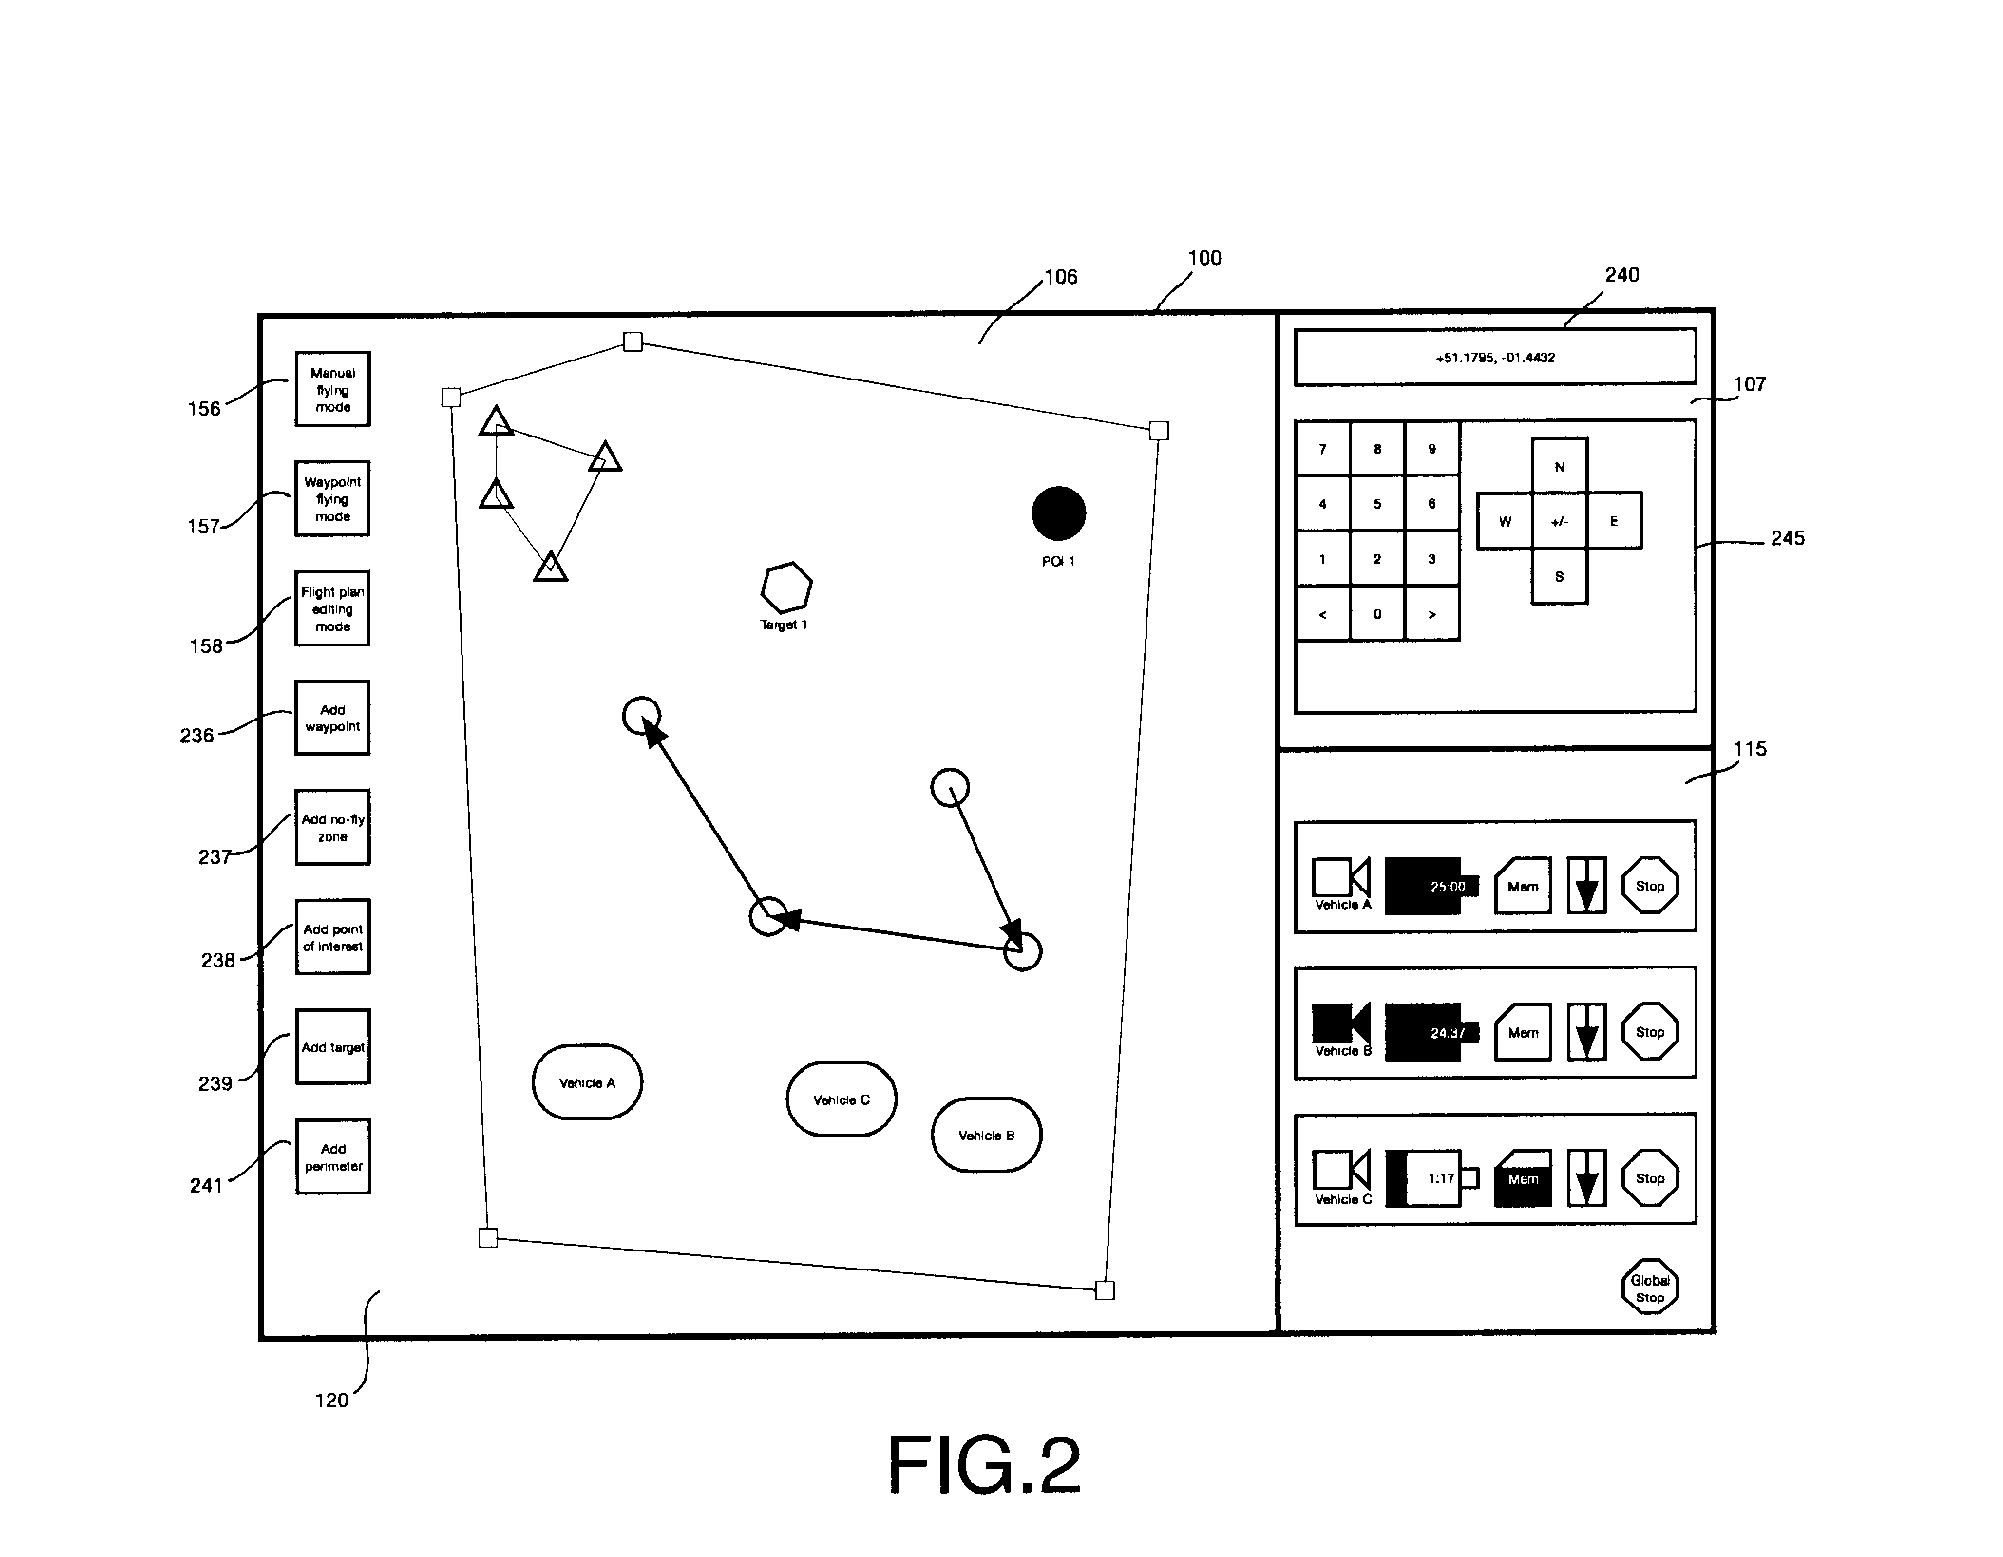 System and method for controlling unmanned aerial vehicles